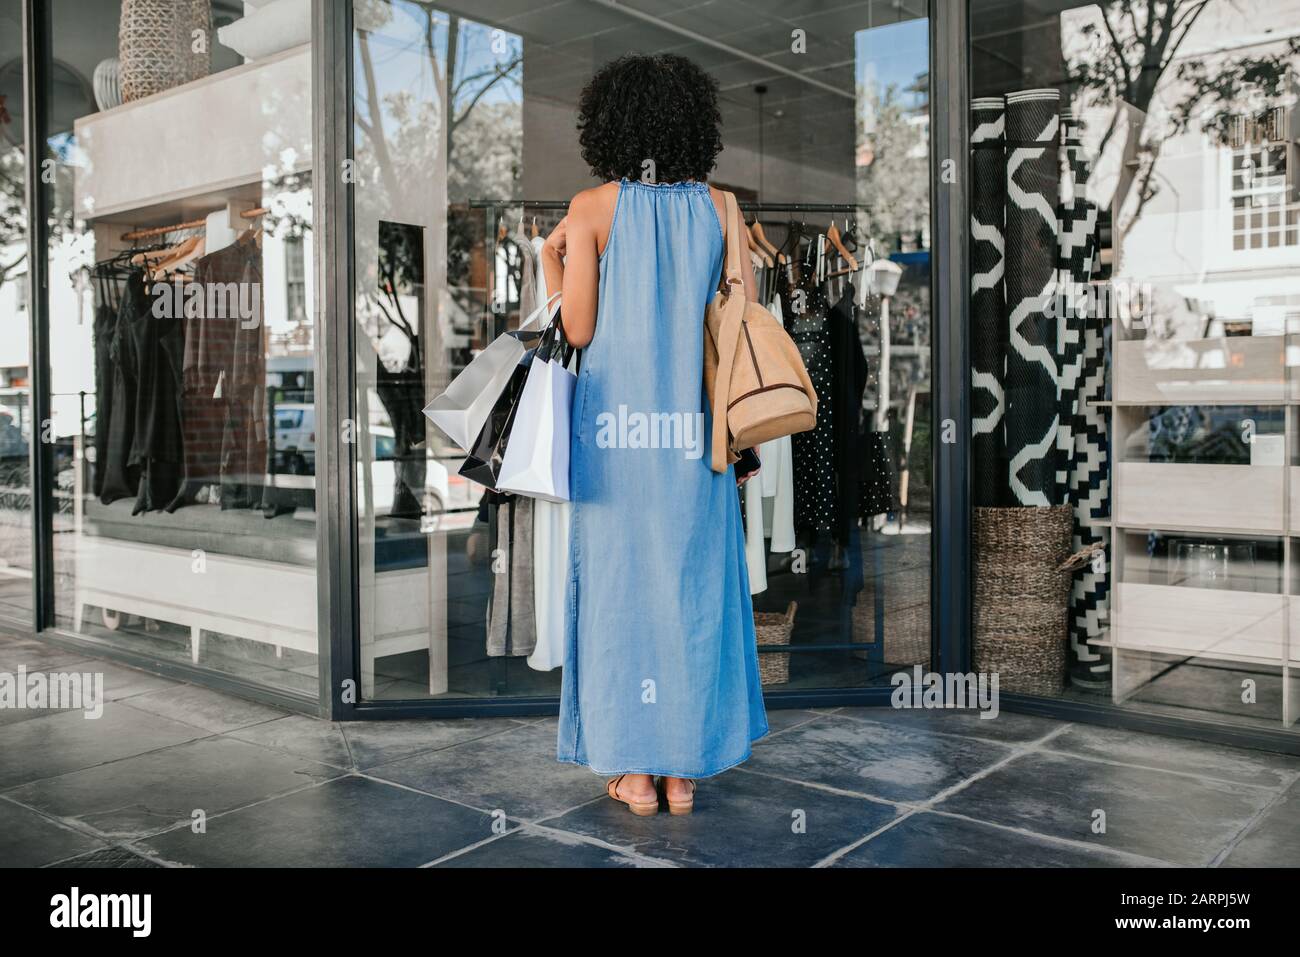 Woman looking at a storefront display while out clothes shopping Stock Photo